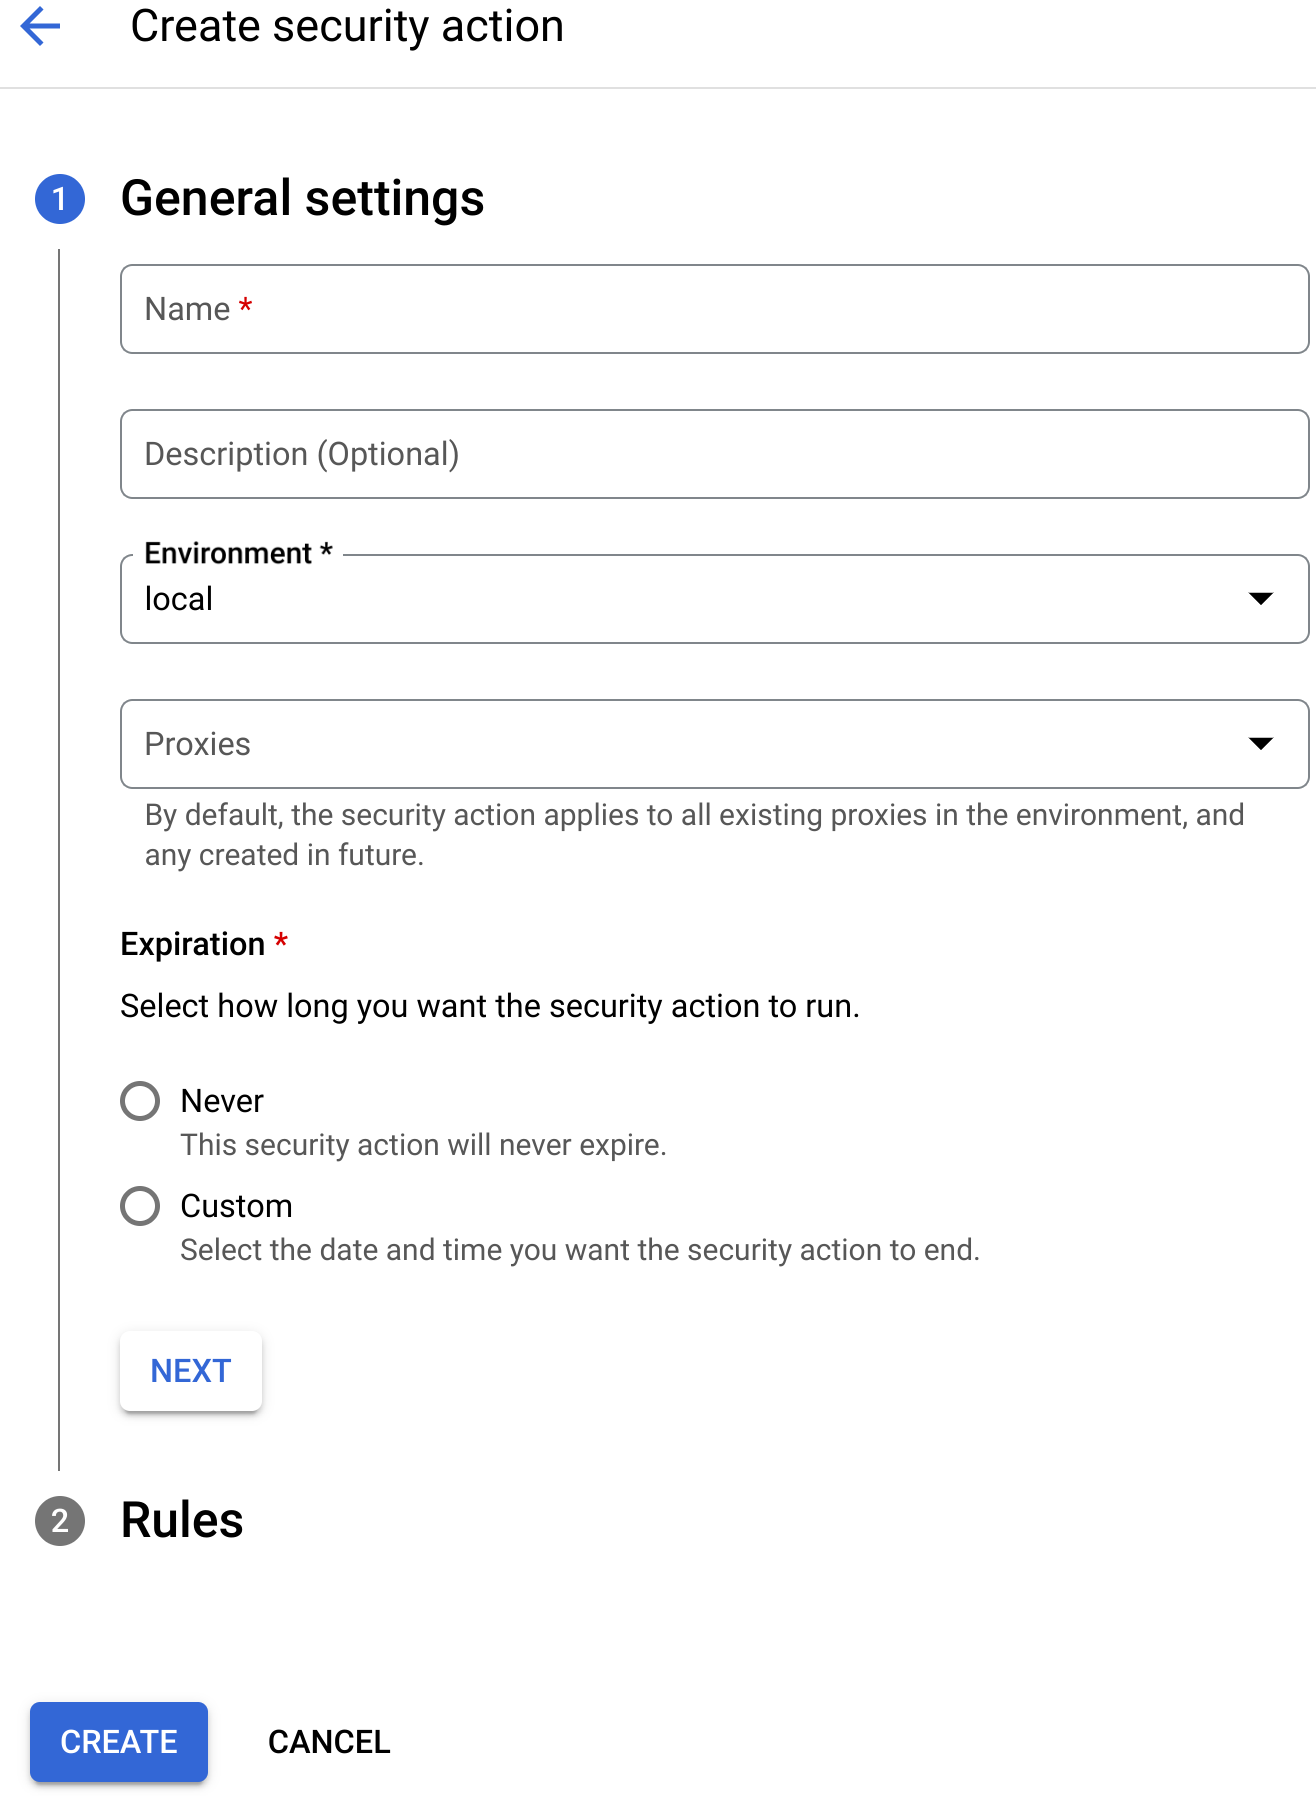 Create security action view.